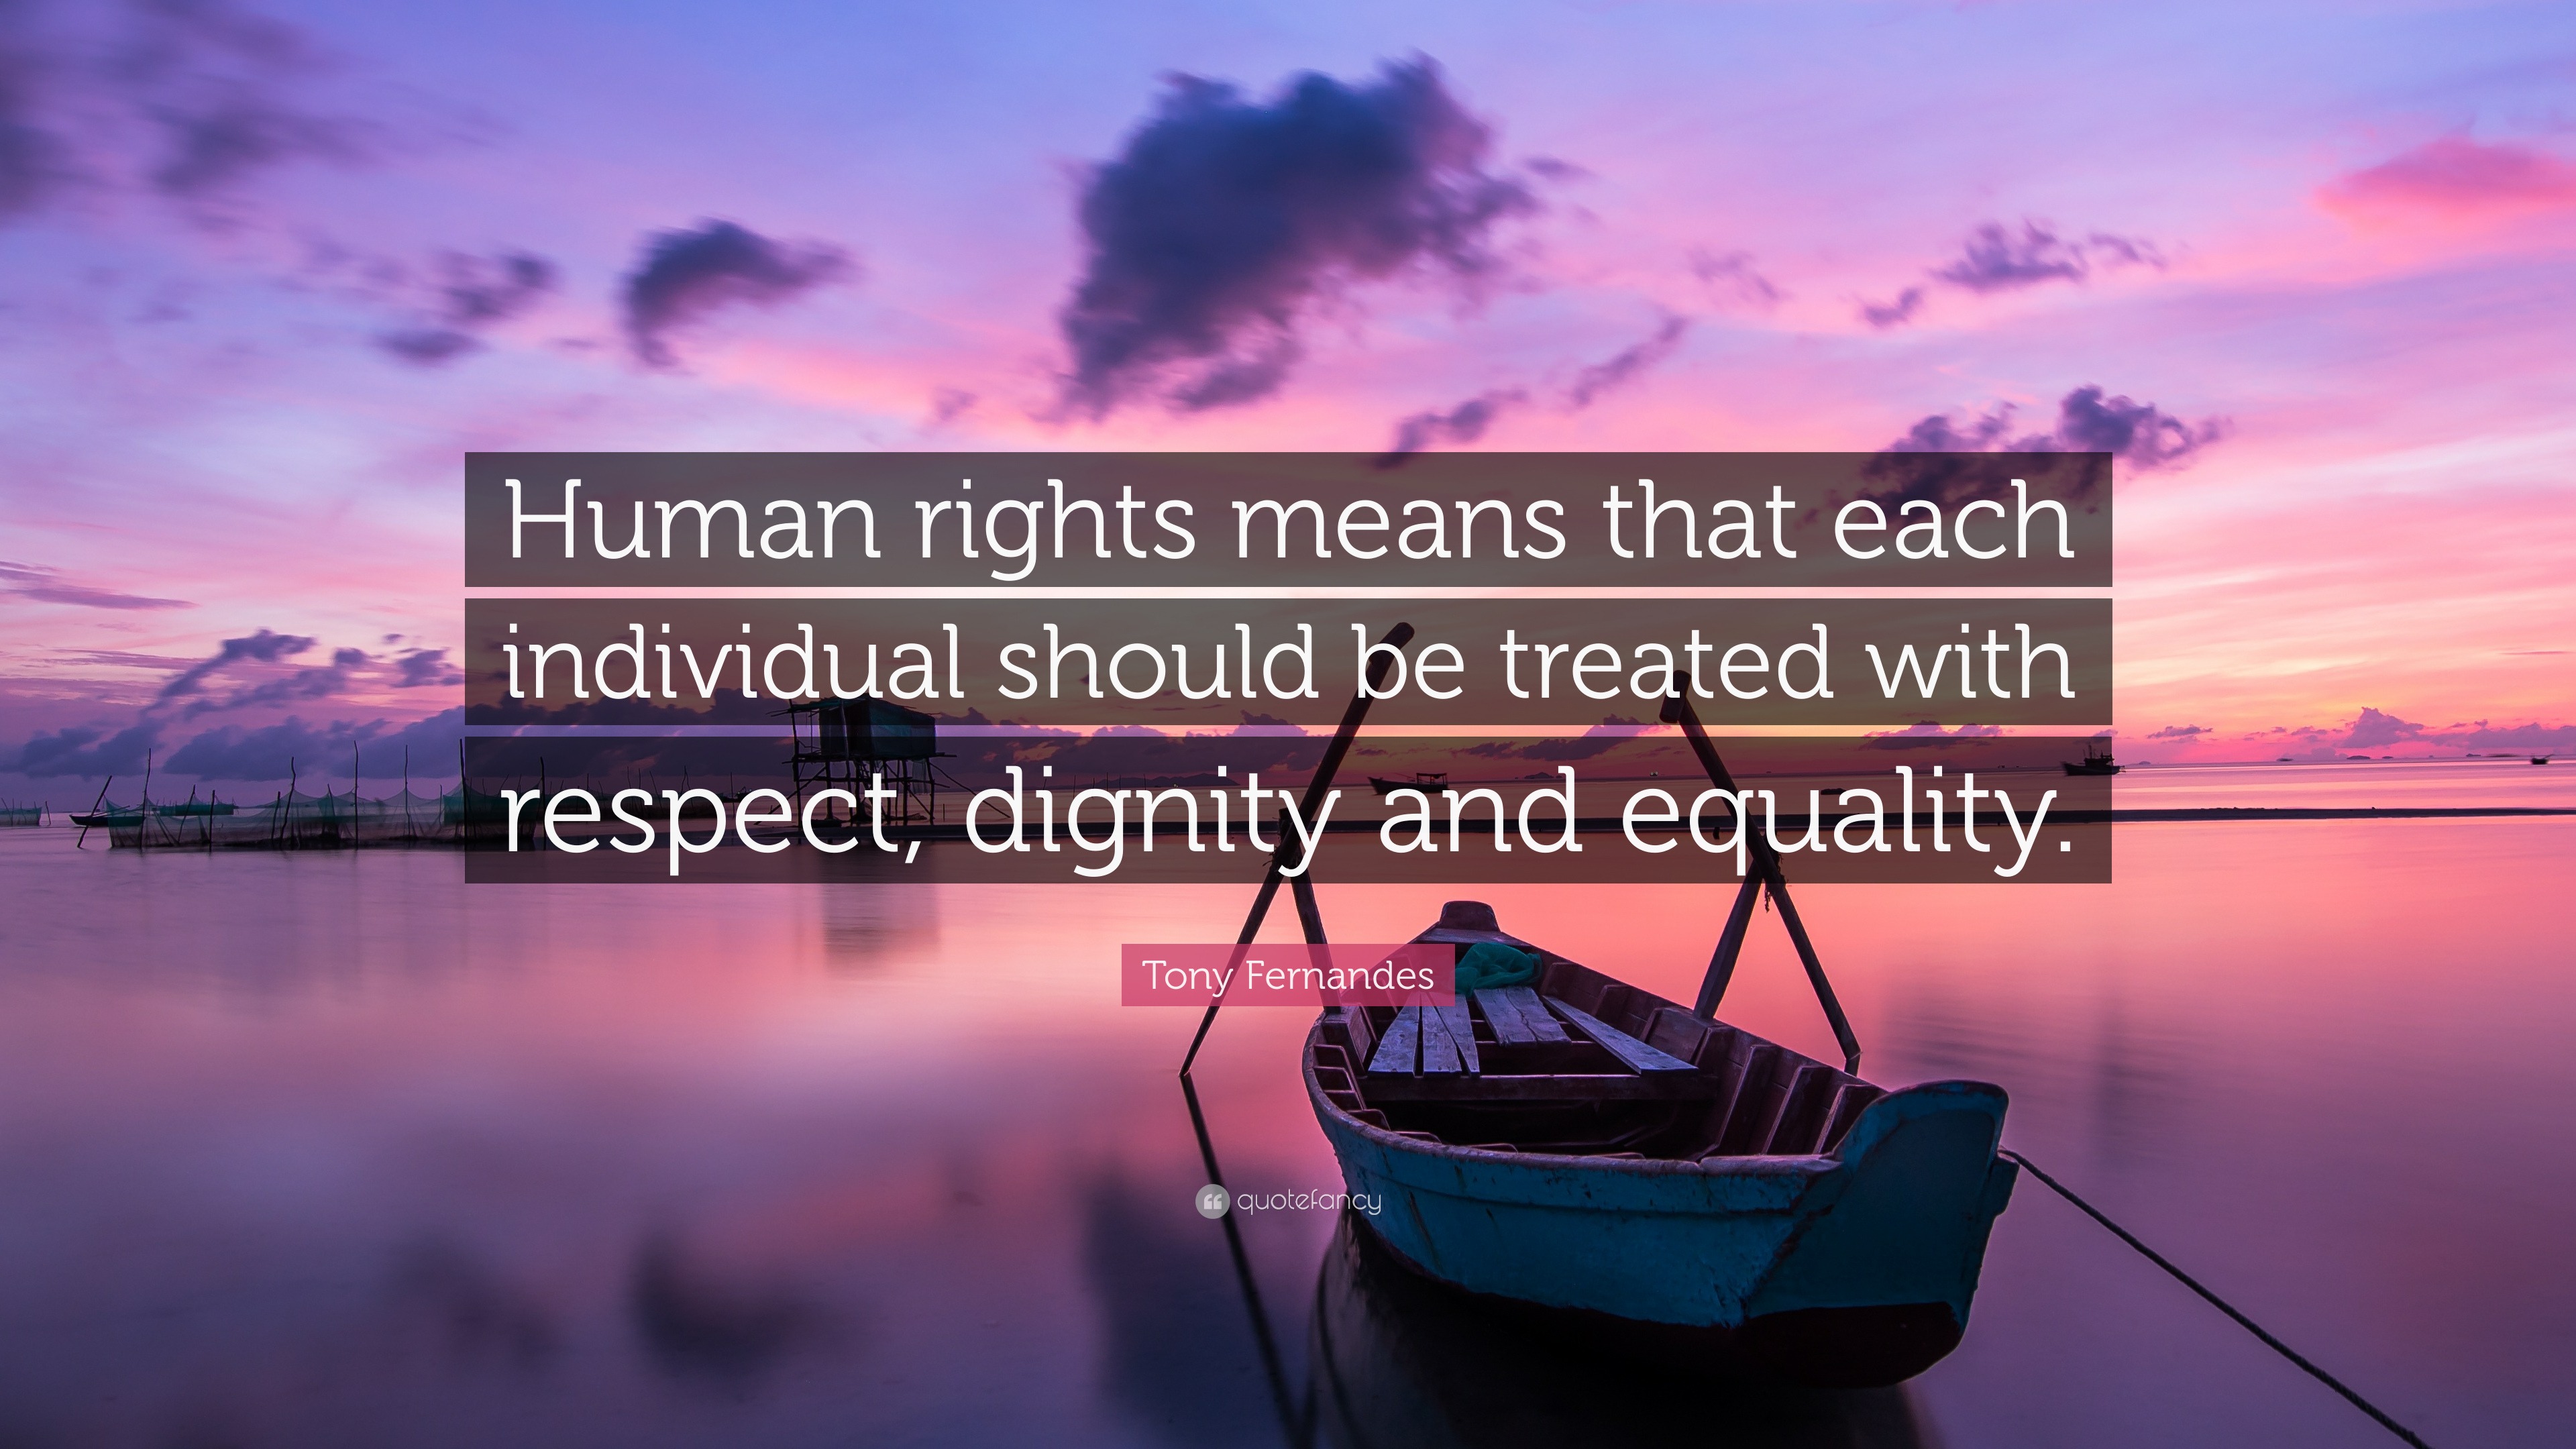 Tony Fernandes Quote: “Human rights means that each individual should